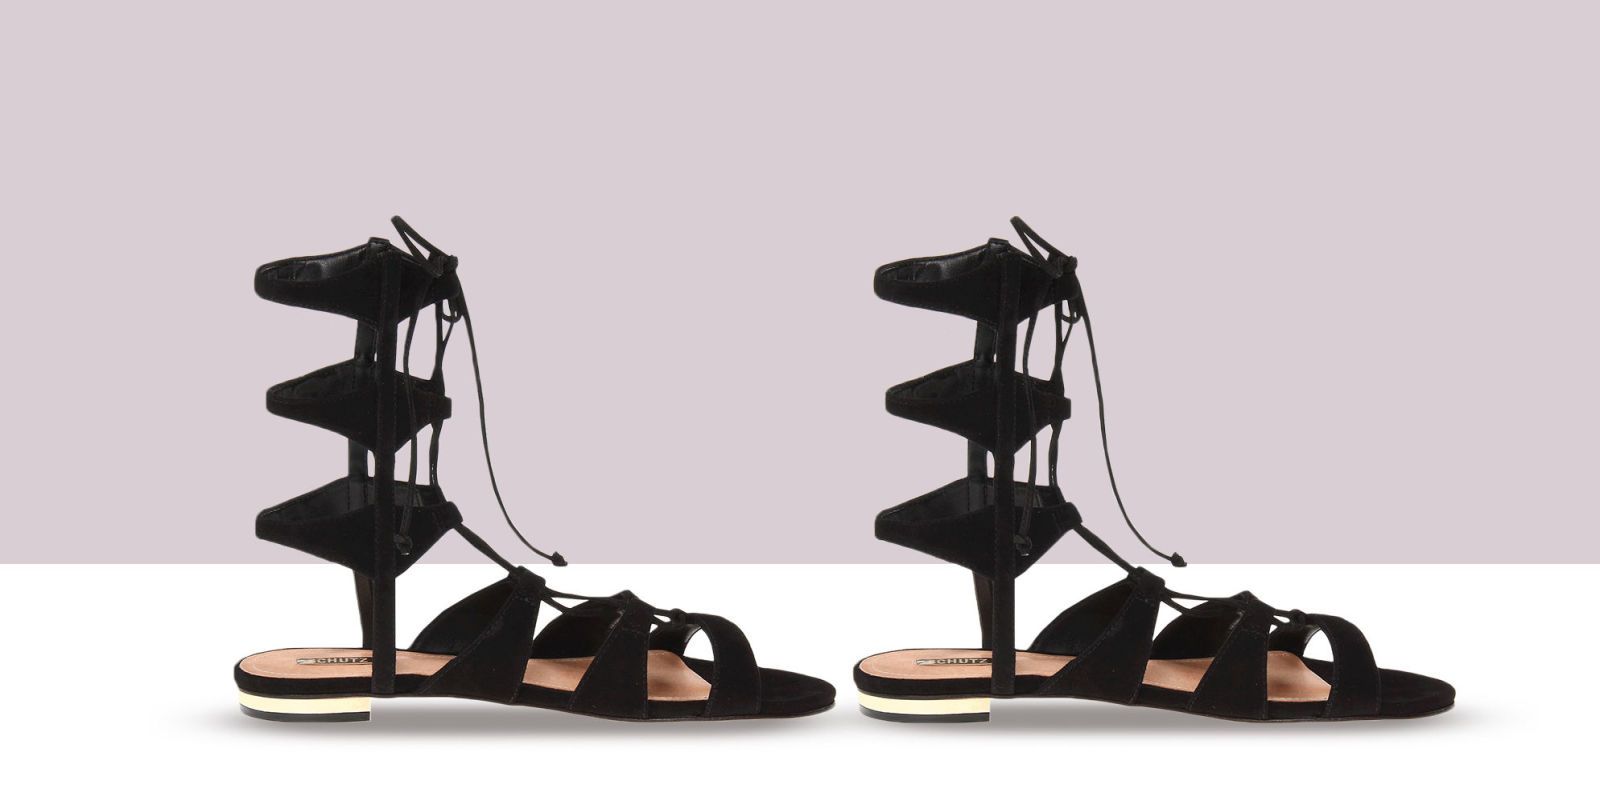 11 Best Gladiator Sandals For Women in 2018 - Lace Up Gladiator